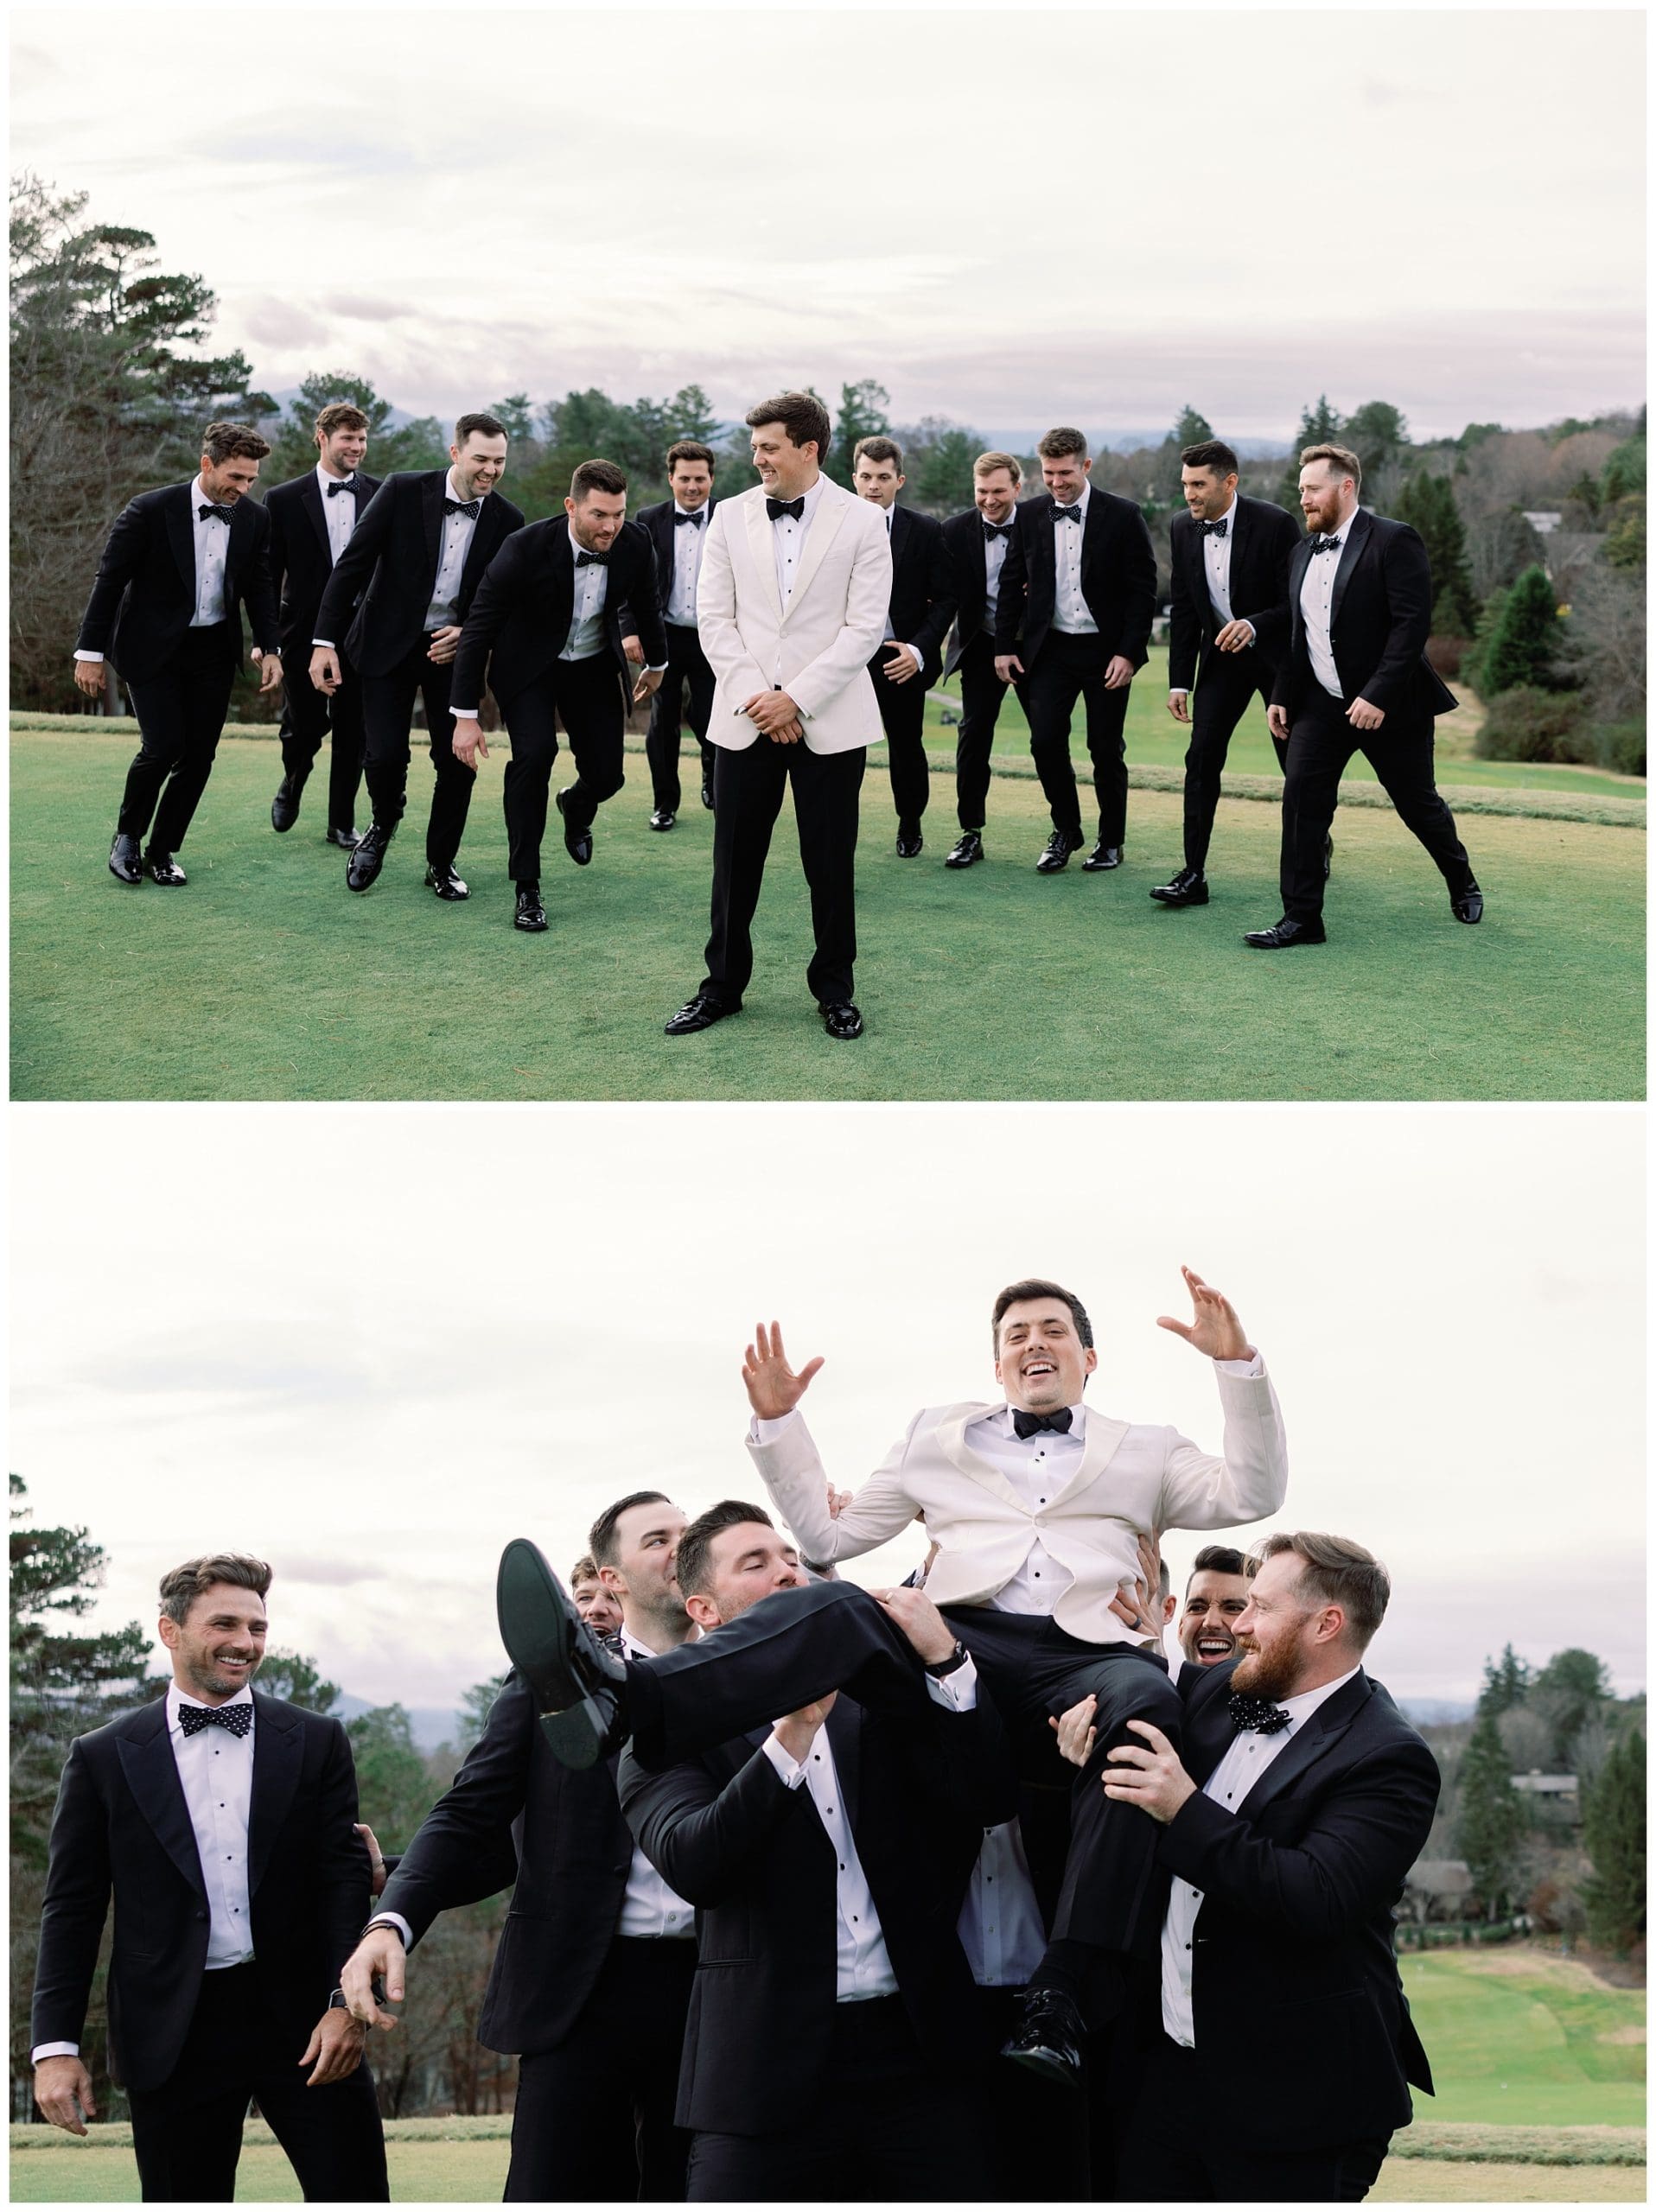 Groom in white suit and black pants takes photo with groomsmen in black suits on lawn